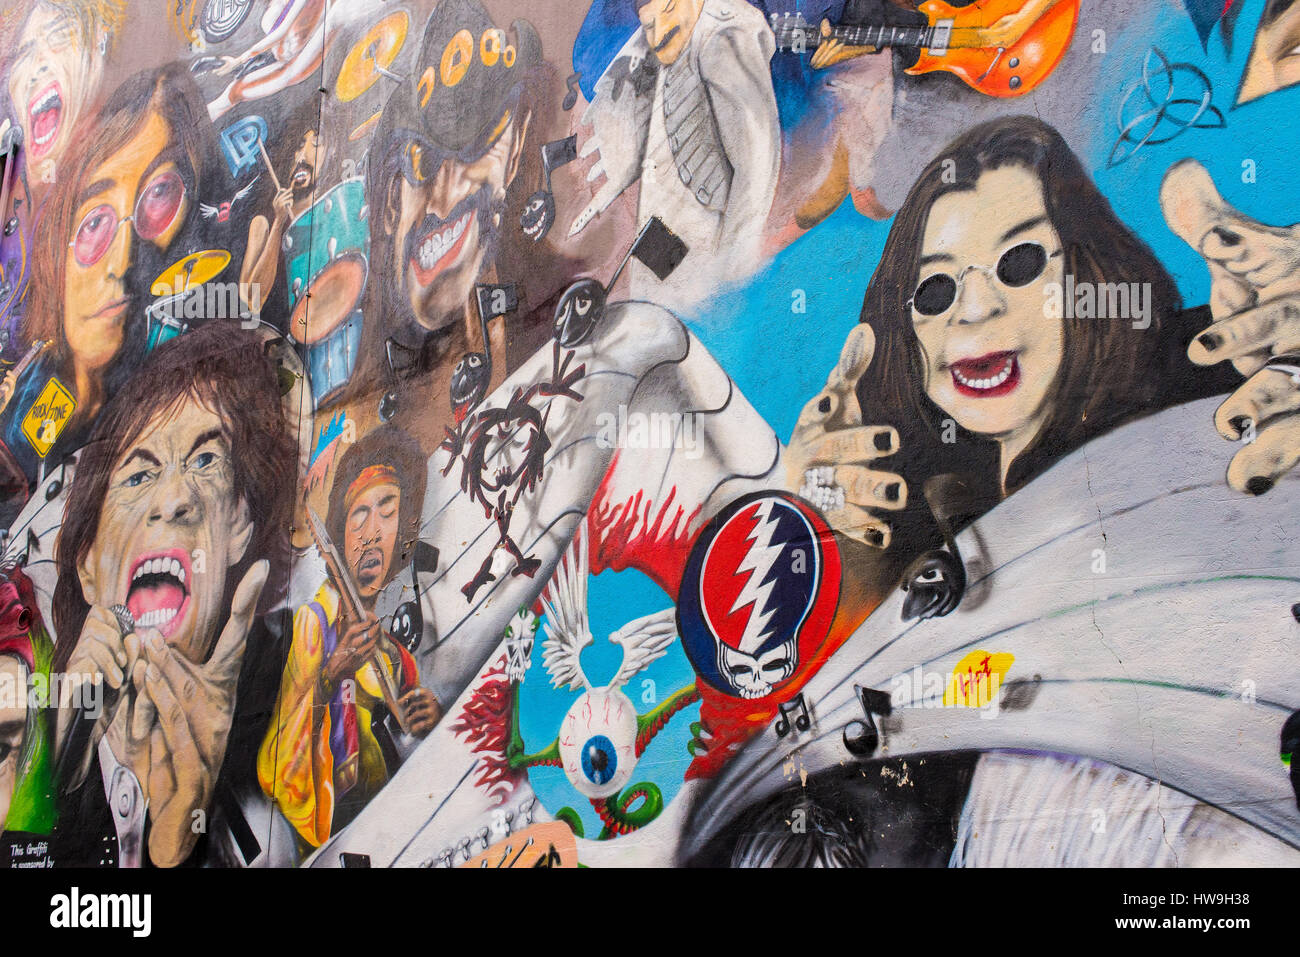 The wall shows portraits of rock stars like Janis Joplin, Keith Richard, Mick Jagger, Morrison and the Doors, Jimy Hendrix, The Who, Pearl Jam, Dave G Stock Photo